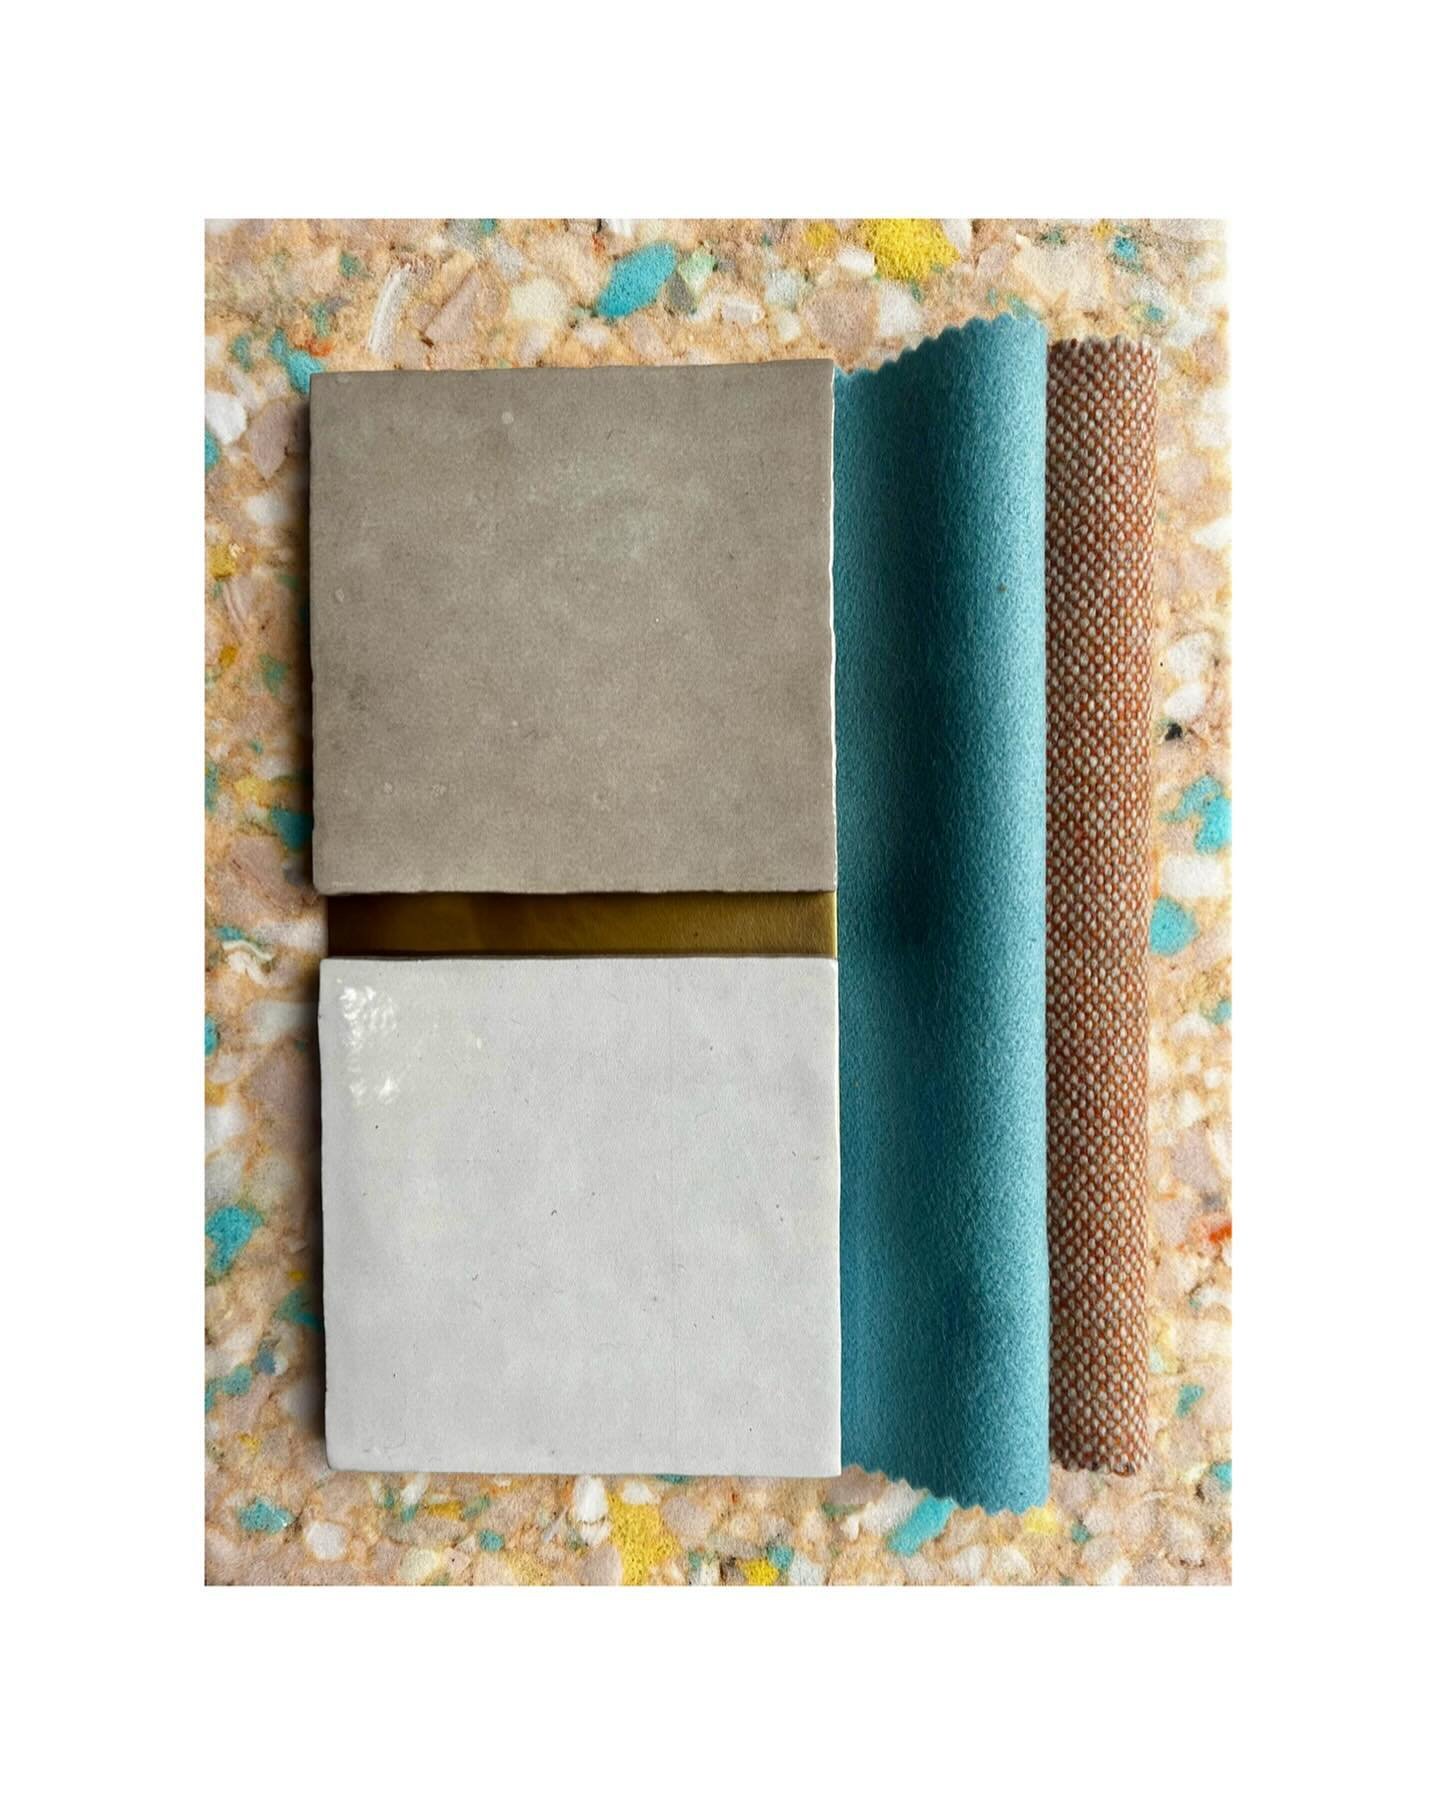 It&rsquo;s rare to find a client that is daring and forward thinking enough to follow through on recycled materials especially in the retail sector. This moodboard was a fun start to a new project. We did a deep dive into using recycled foam within o